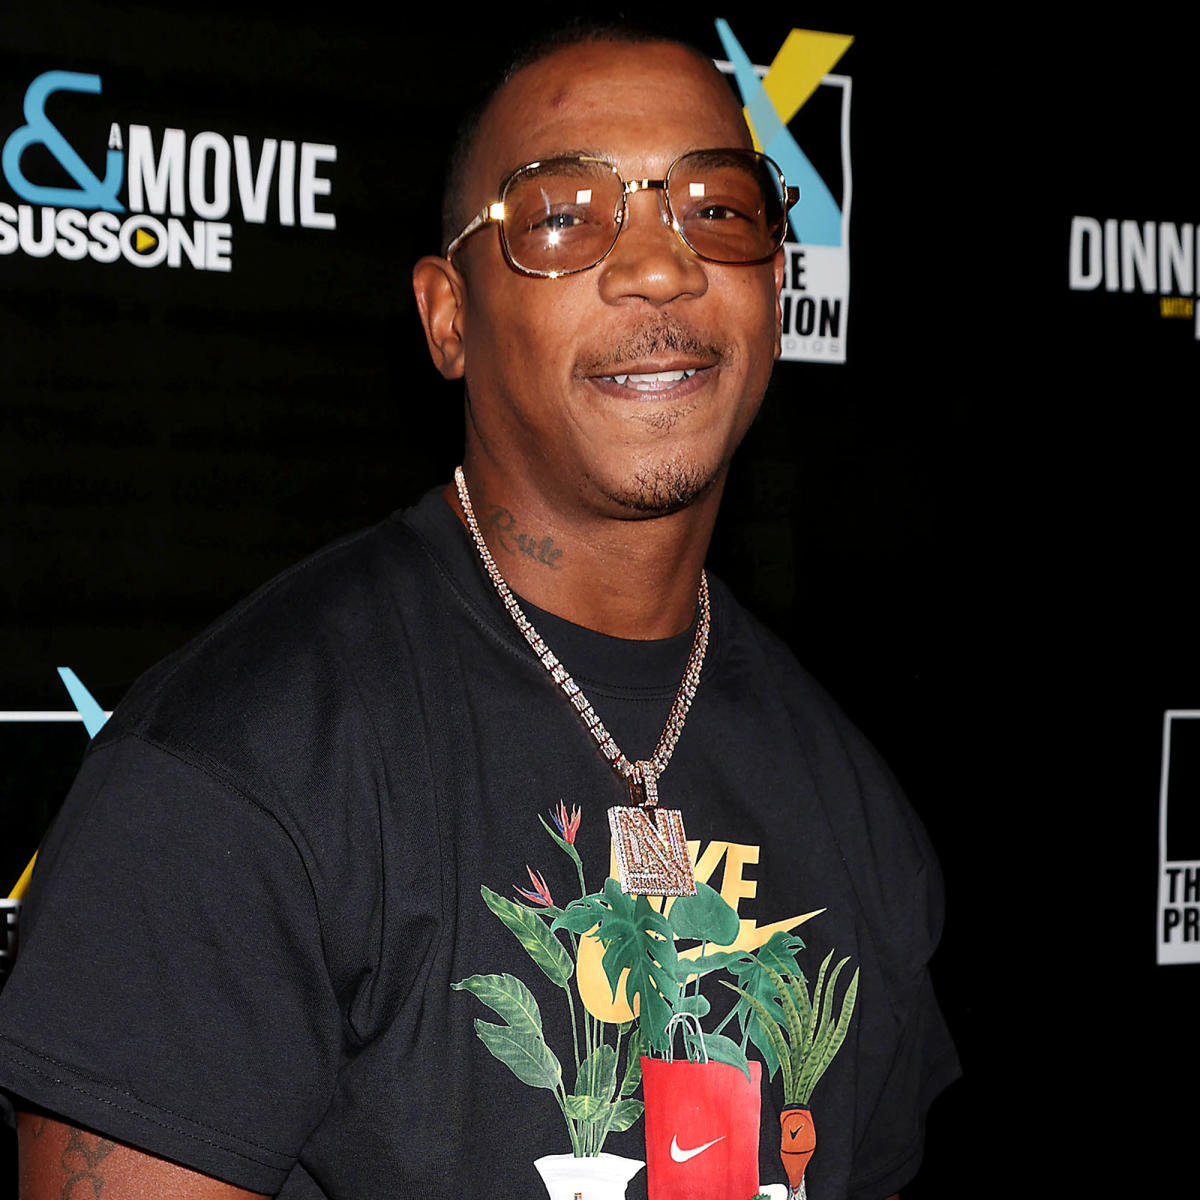 Ja Rule 25 Things You Don’t Know About Me (I Get Mistaken for Ludacris!)